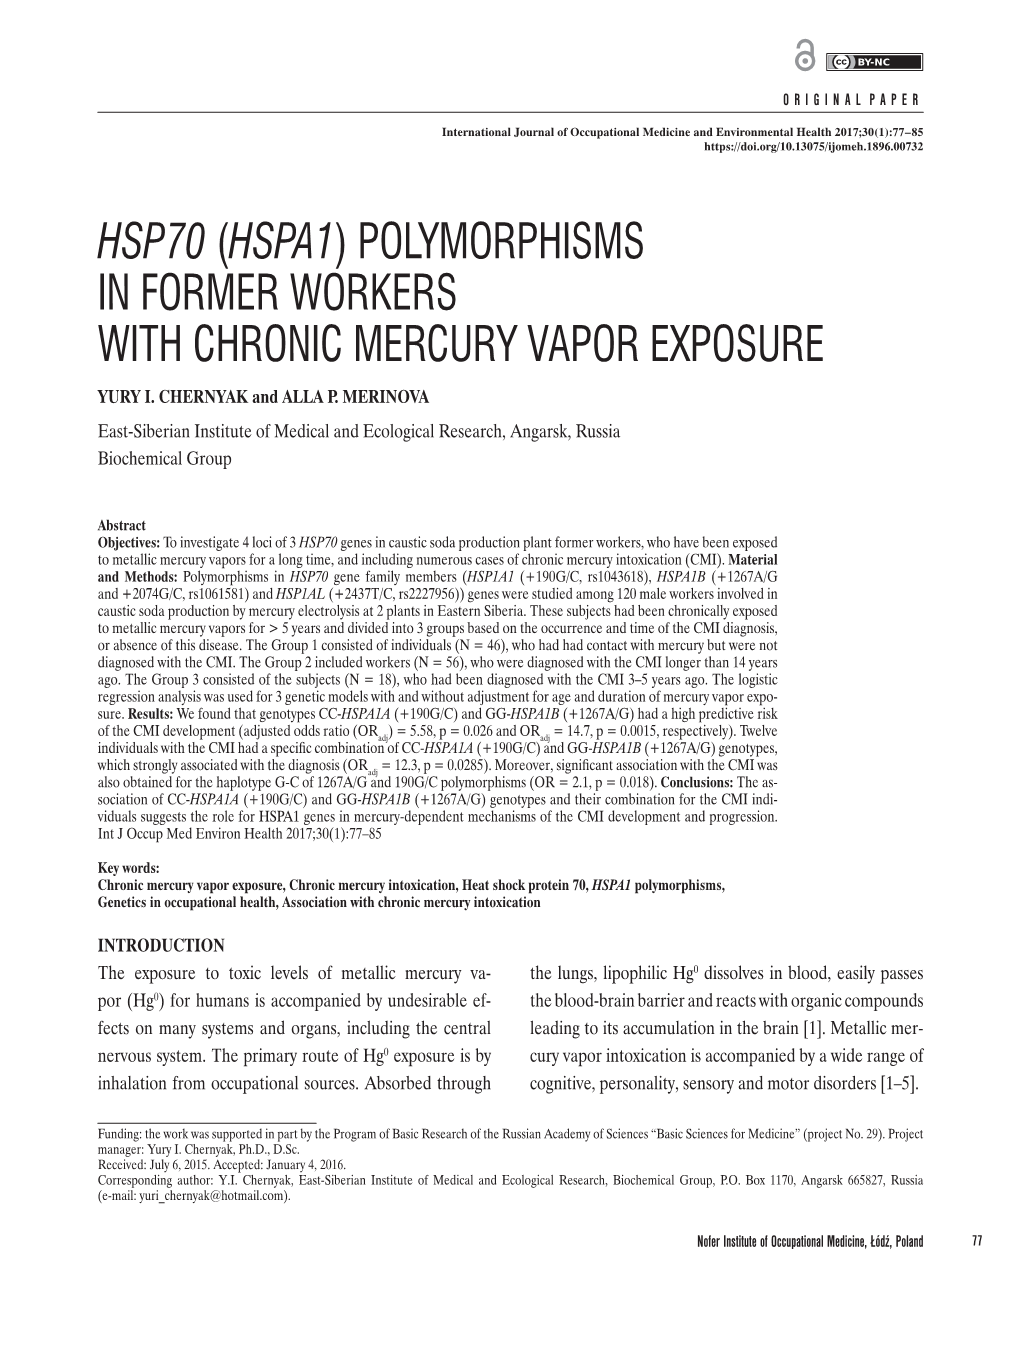 Hsp70 (Hspa1) Polymorphisms in Former Workers with Chronic Mercury Vapor Exposure Yury I